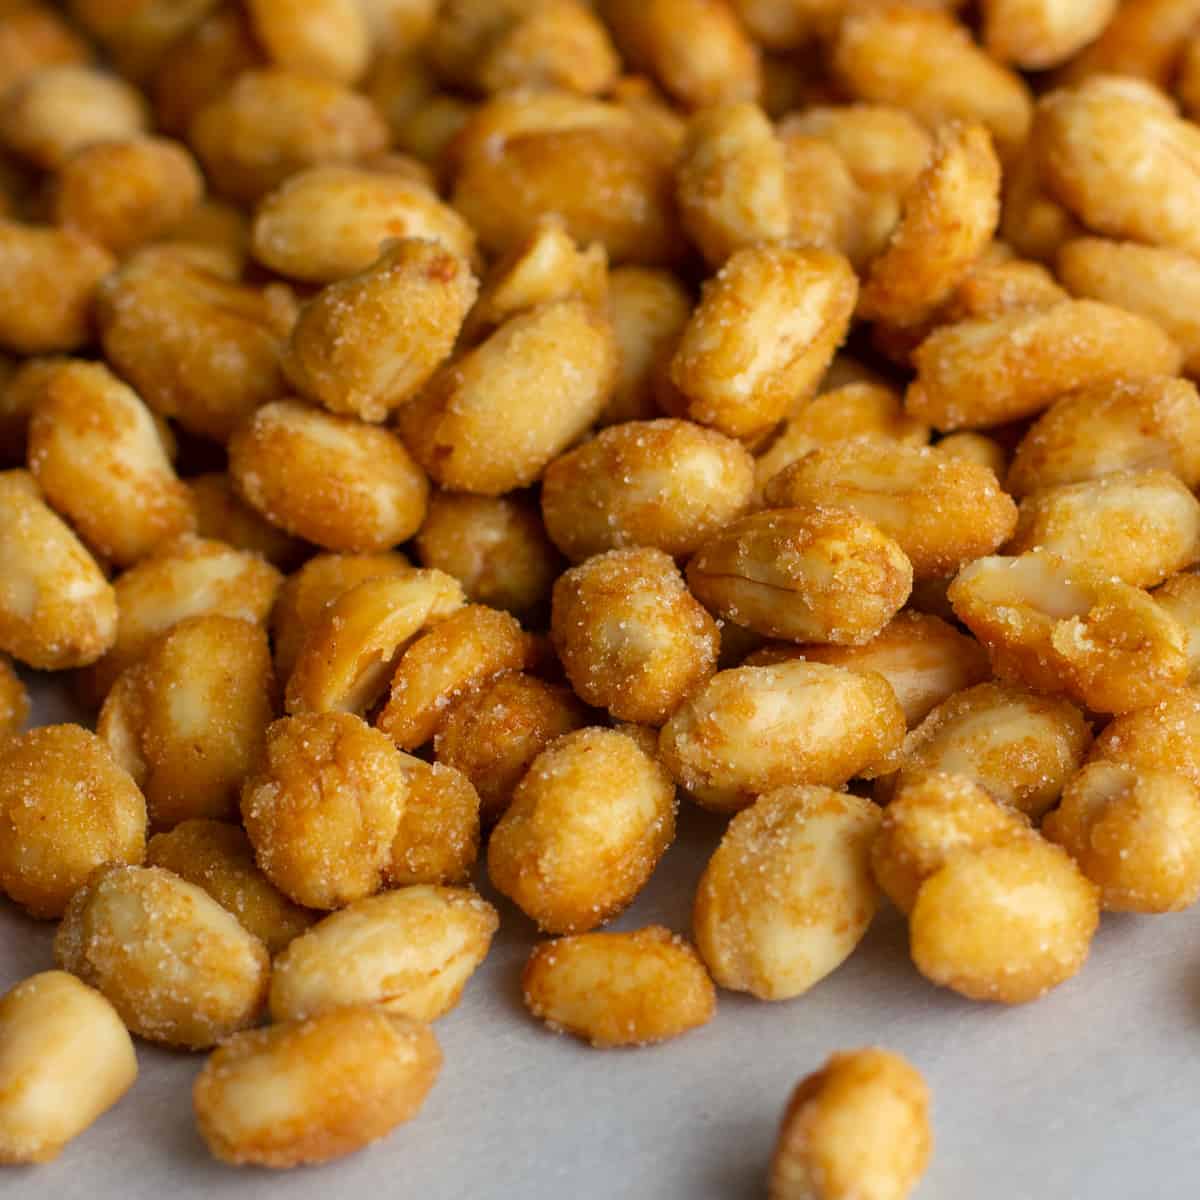 Close up picture of honey roasted peanuts.